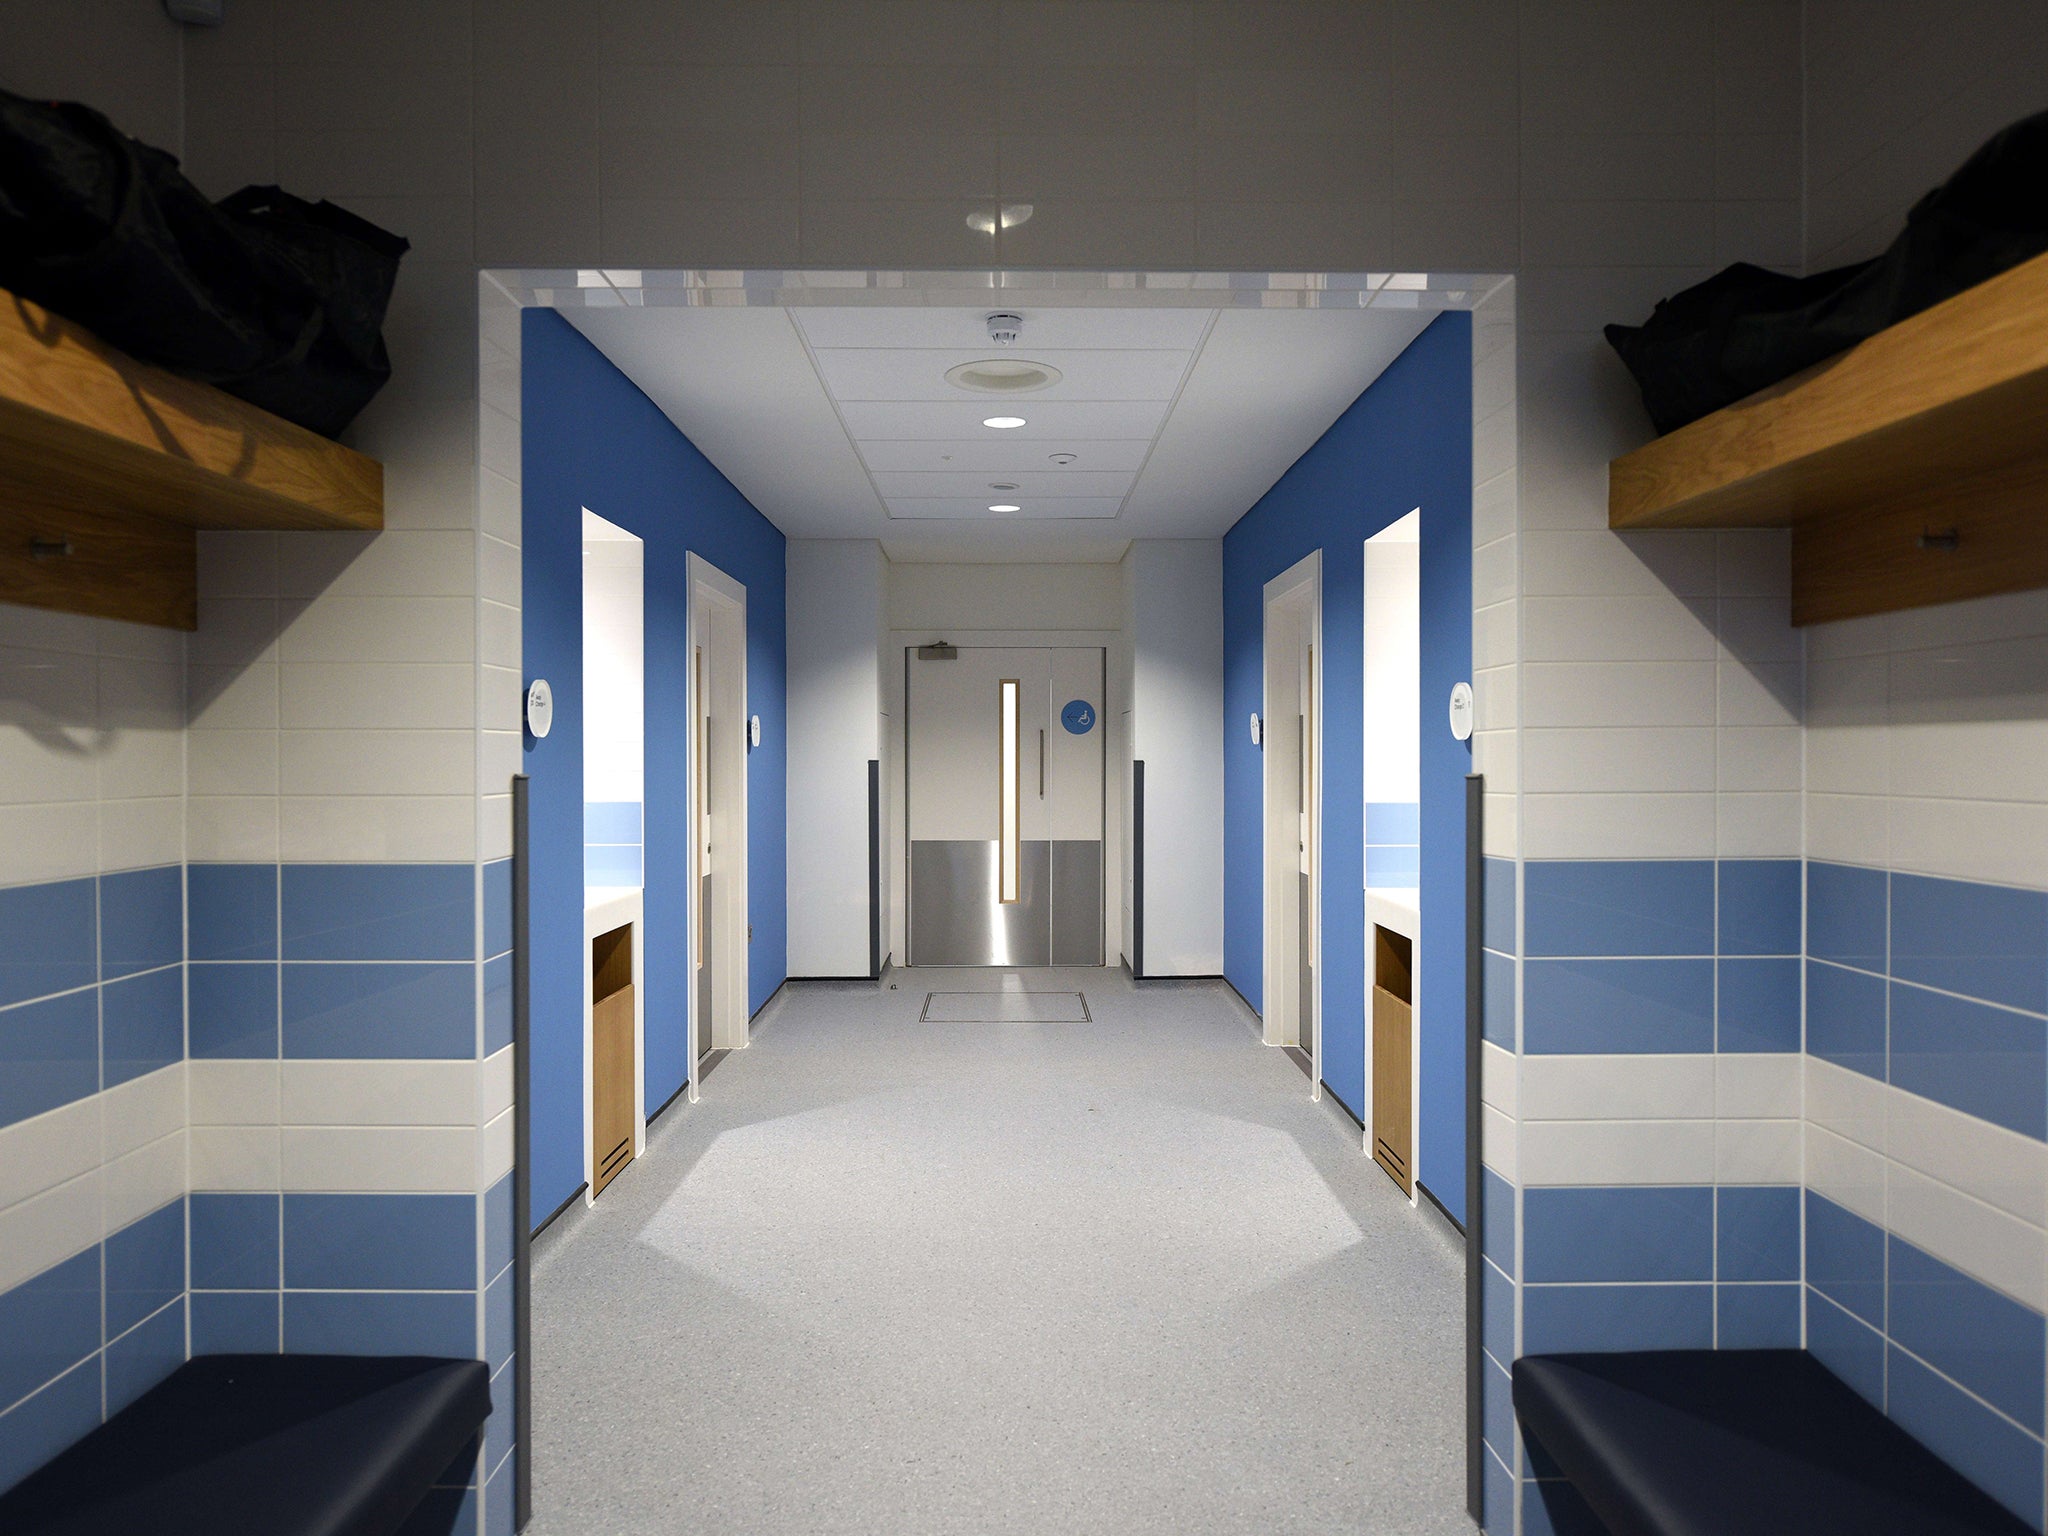 Changing rooms in the performance centre of the newly opened City Football Academy in Manchester